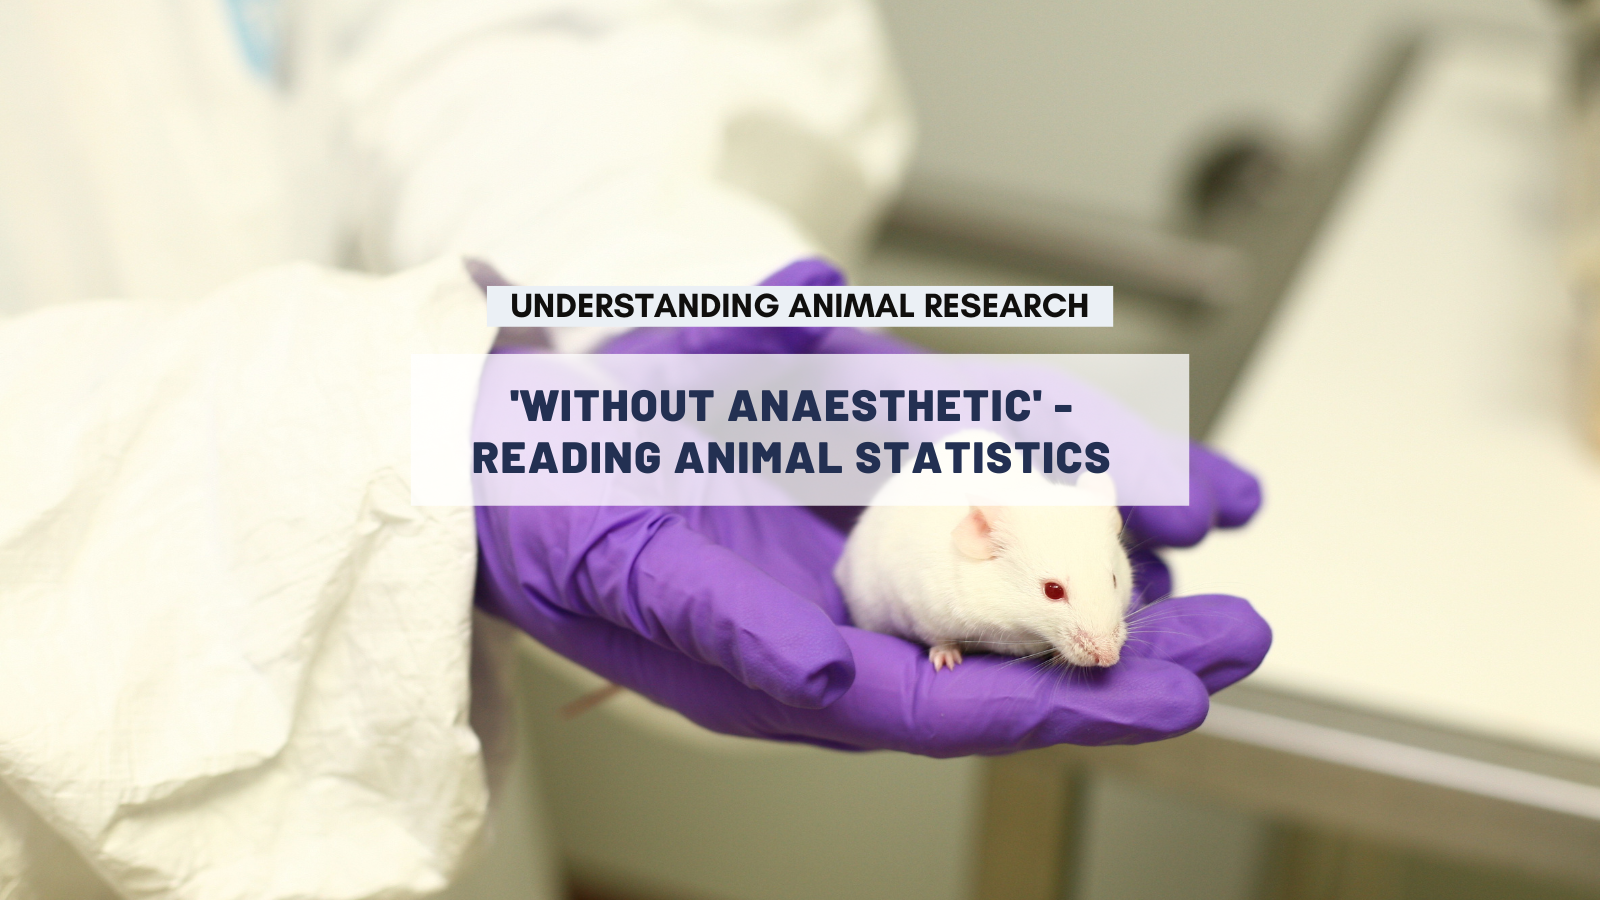 'Without anaesthetic' - reading animal statistics